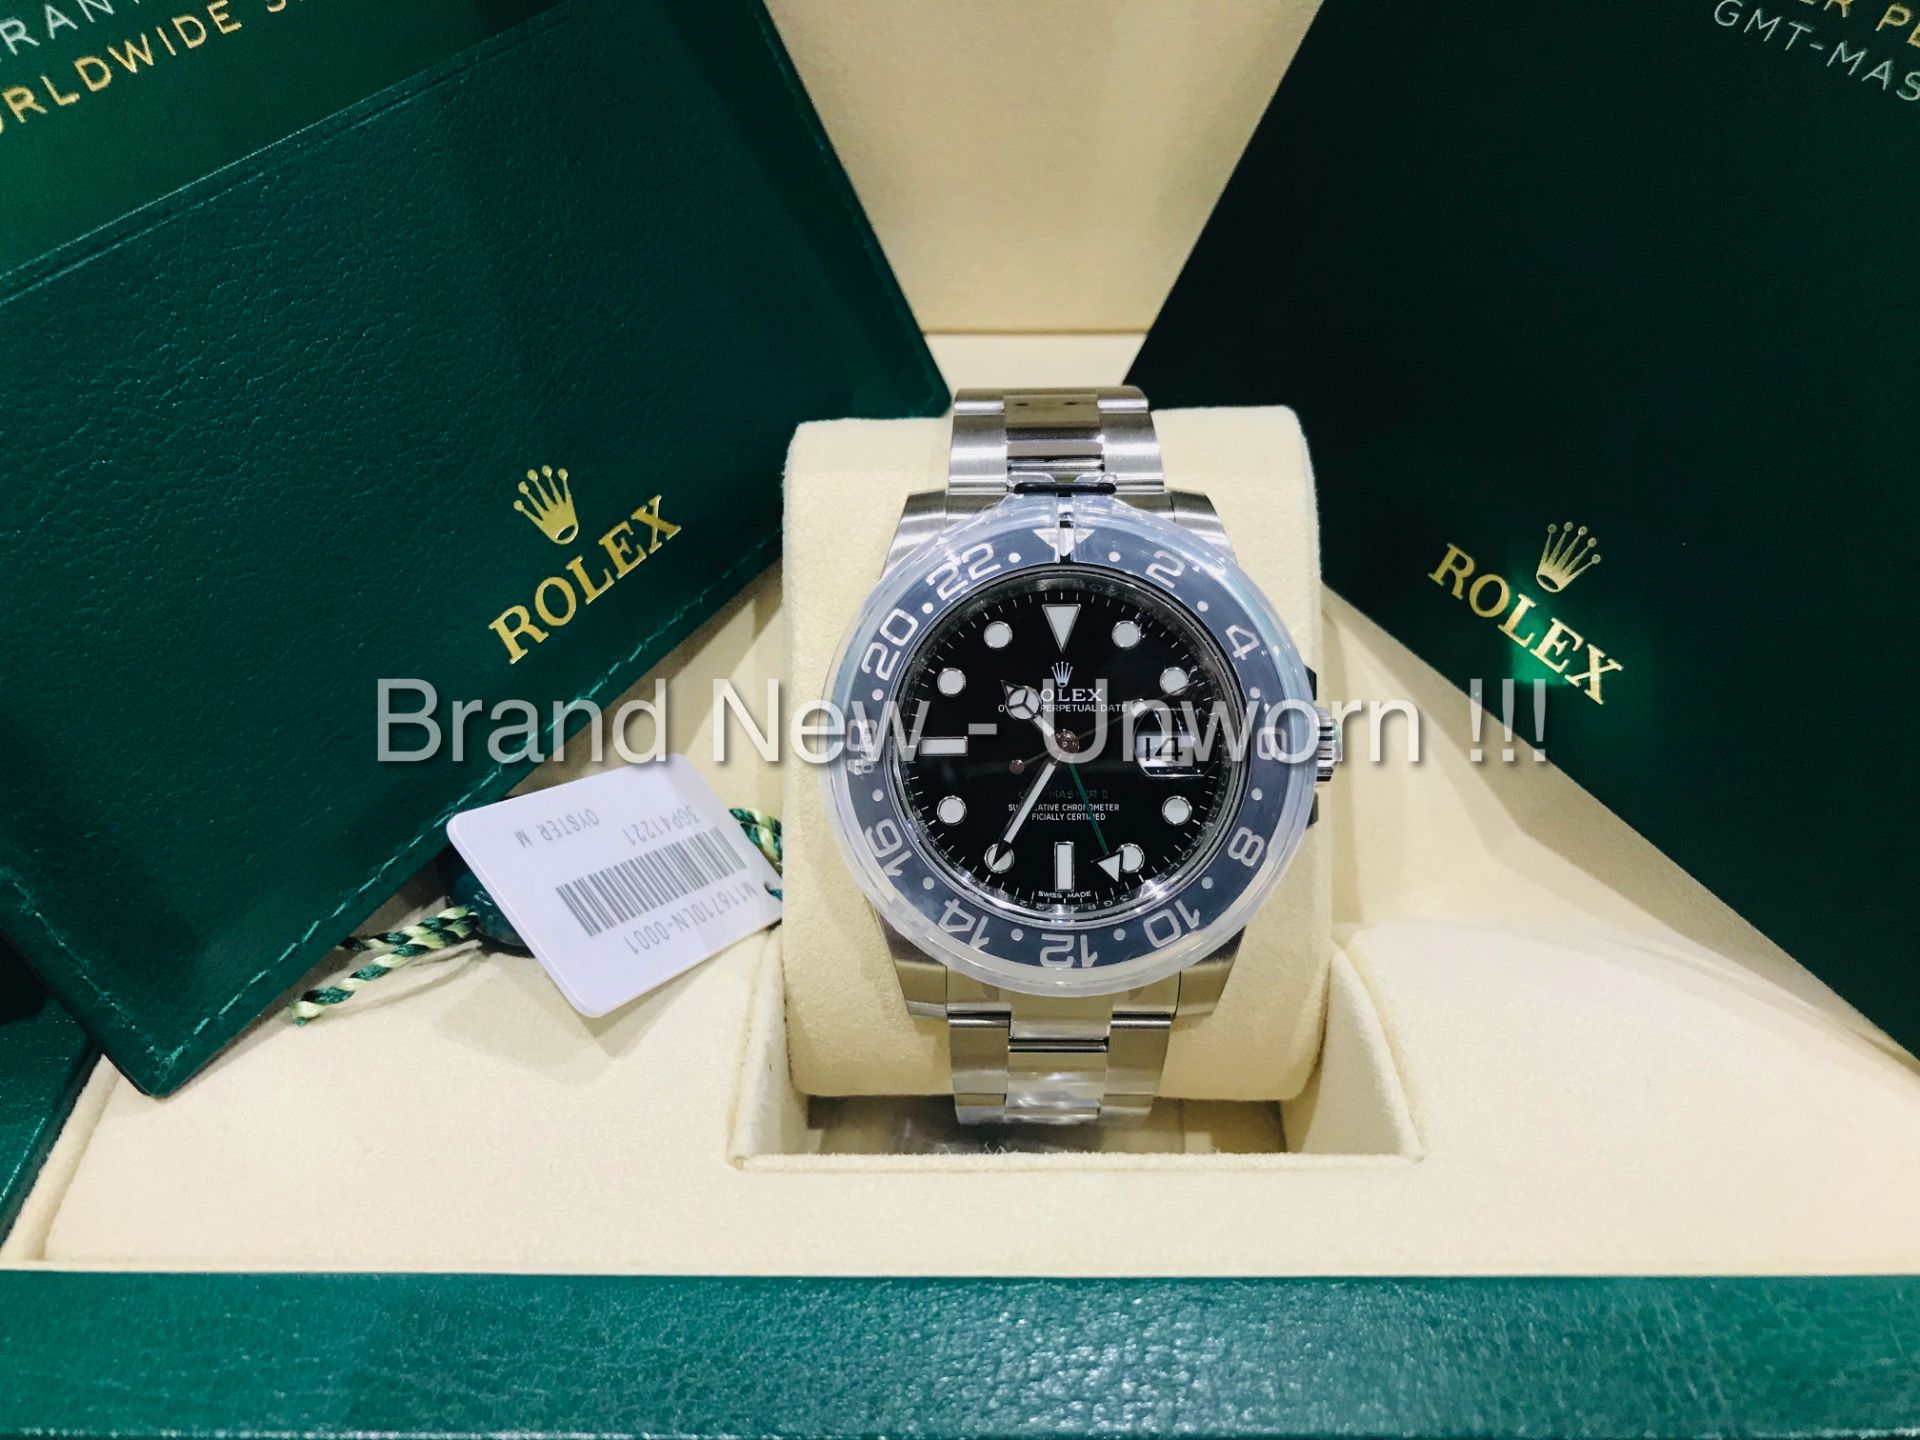 ROLEX "GMT-MASTER II" STEEL/BLACK MODEL (ONLY 2 WEEKS OLD) NEVER WORN OR OUT THE BOX (2018 NOVEMBER) - Image 3 of 5